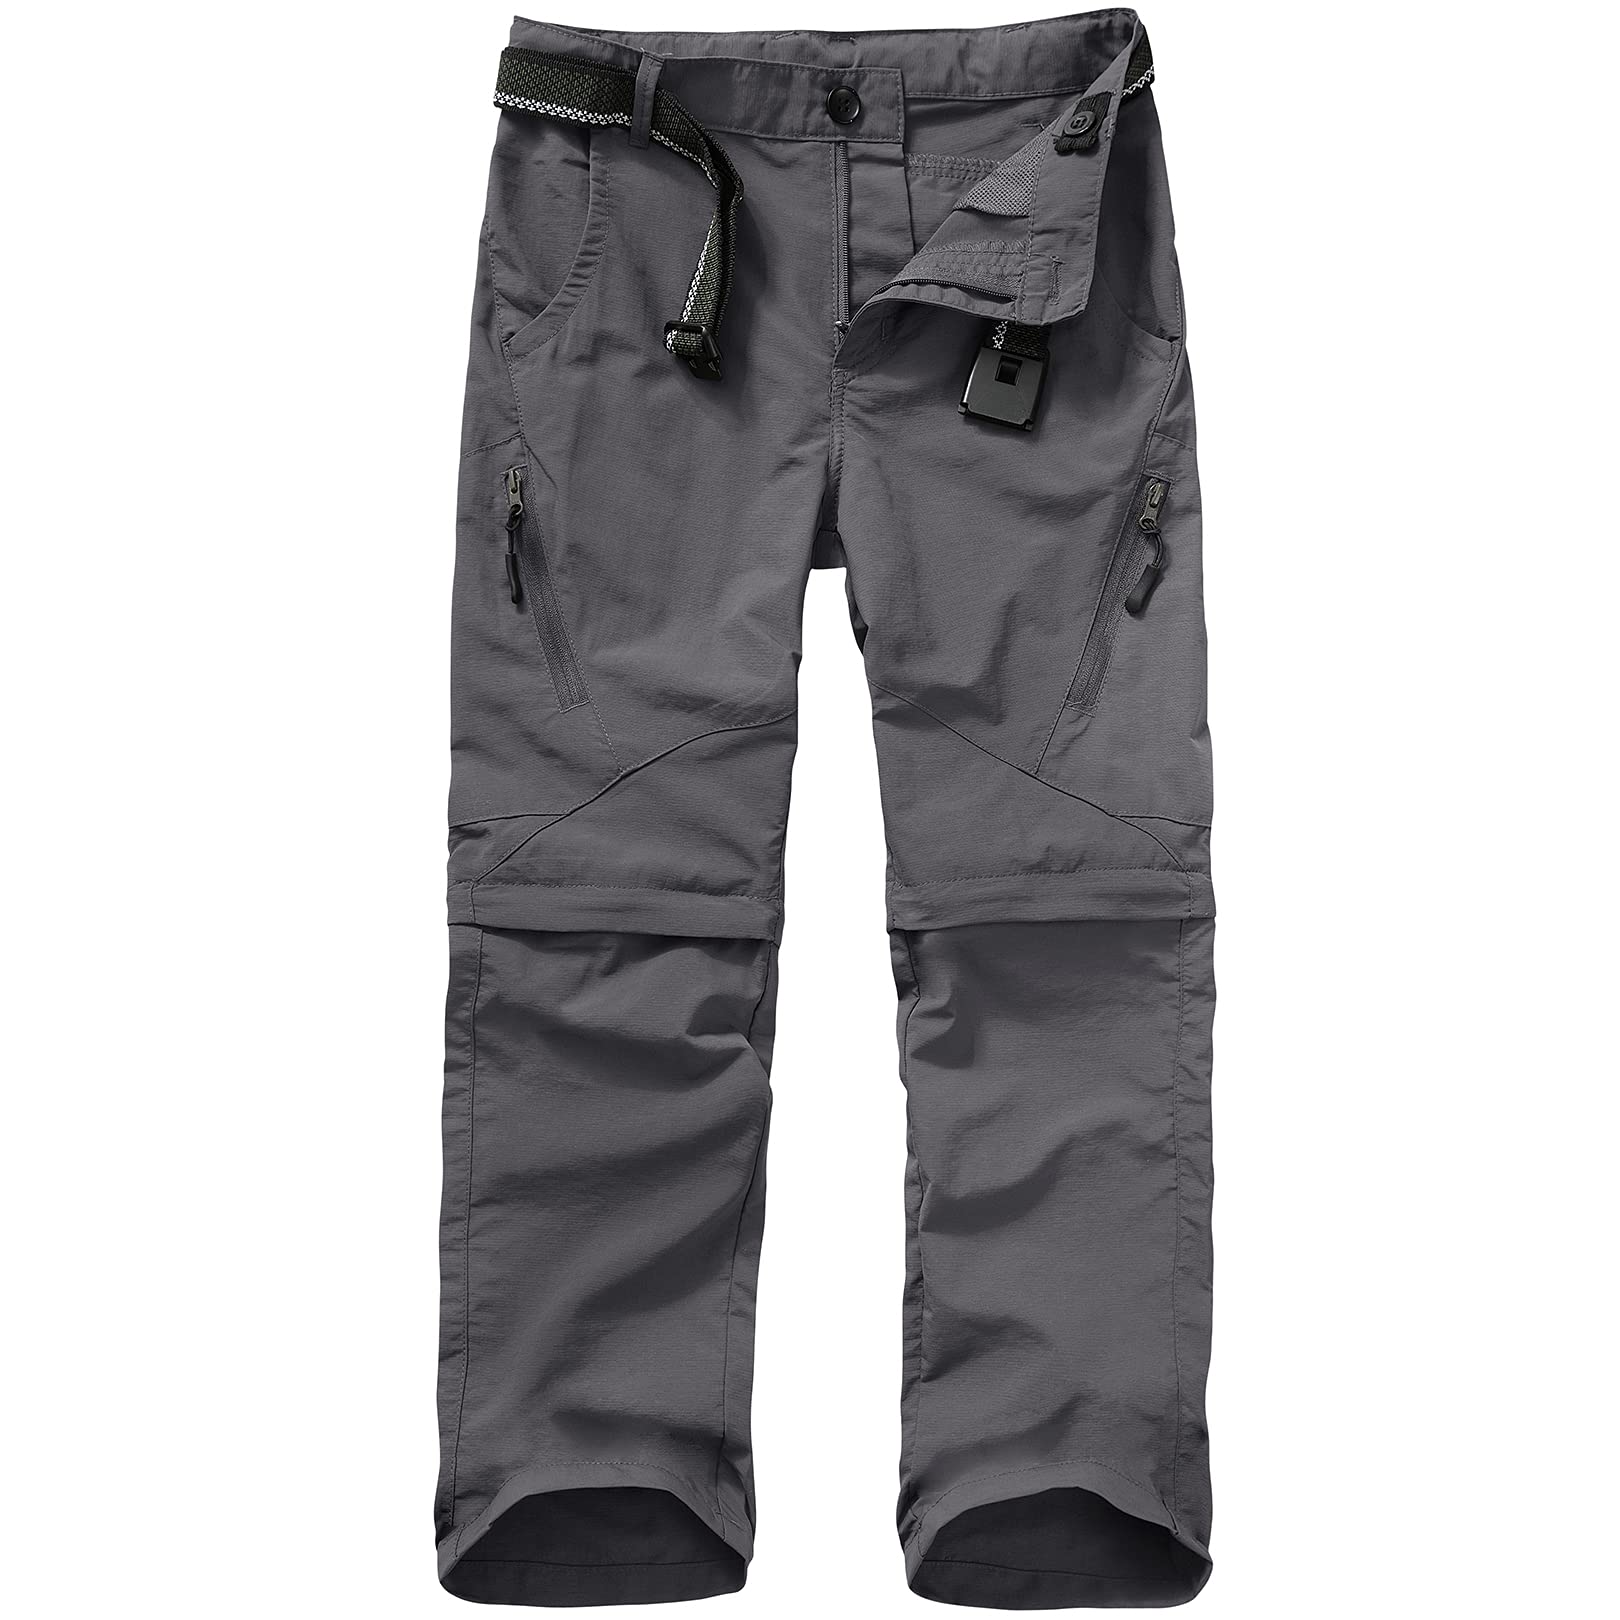 Womens Hiking Pants Convertible Quick Dry Stretch Lightweight Zip Outdoor  Fishing Travel Pants for Teen Boys No Belt